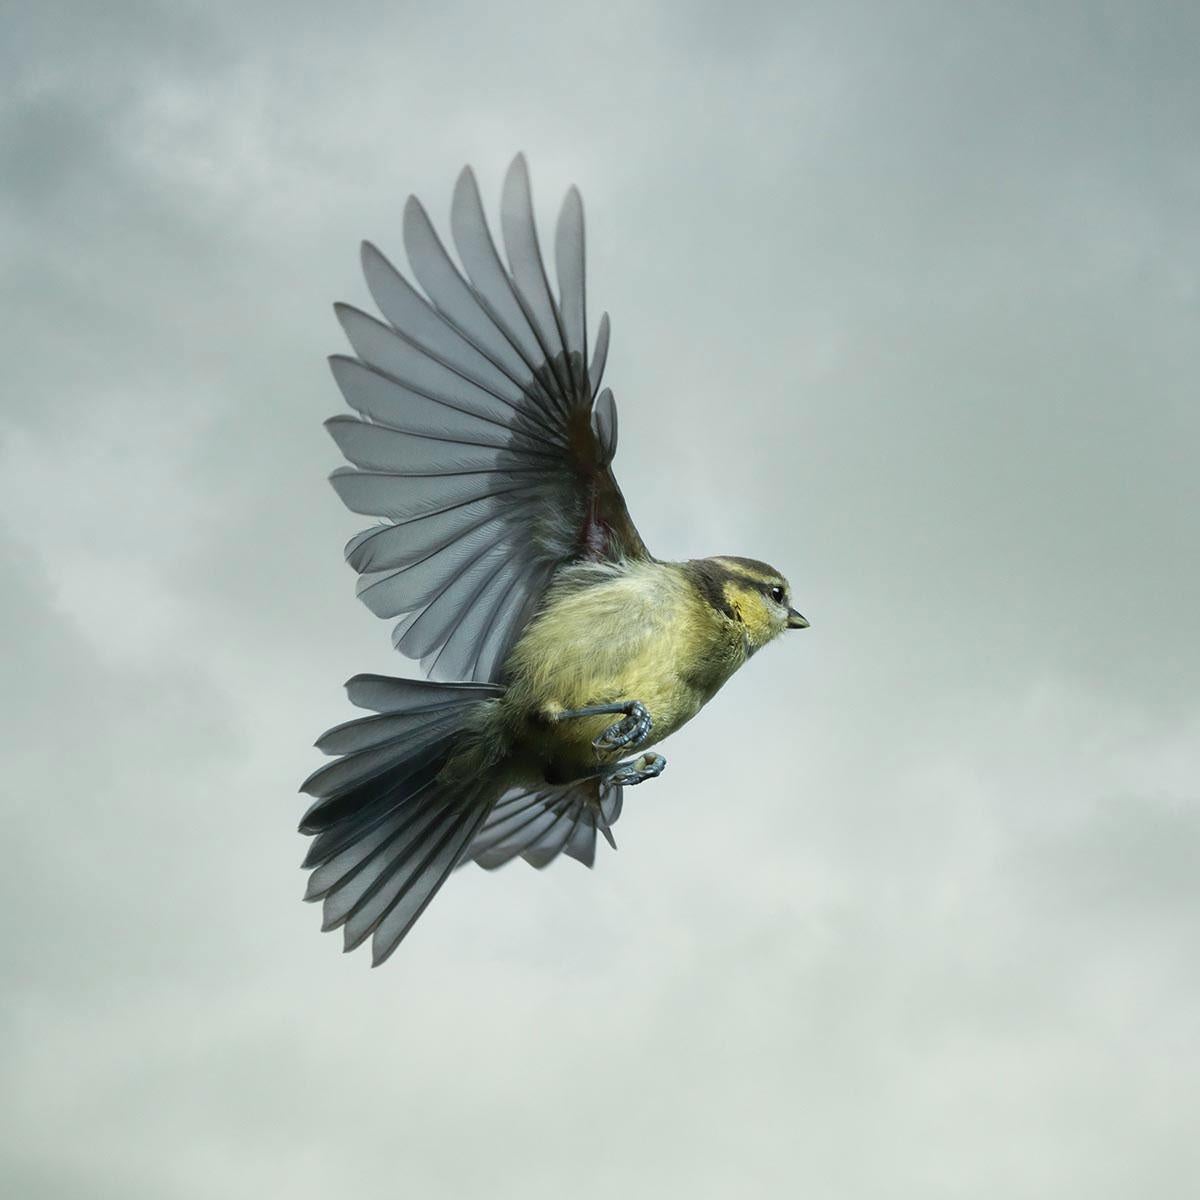 Blue Tit is part of the In Flight collection, a series of portraits of the wild birds taken in the gardens of Mark Harvey's home in Norfolk, England.

Turning on the wind, this juvenile blue tit is showing off its acrobatic skills and using wings